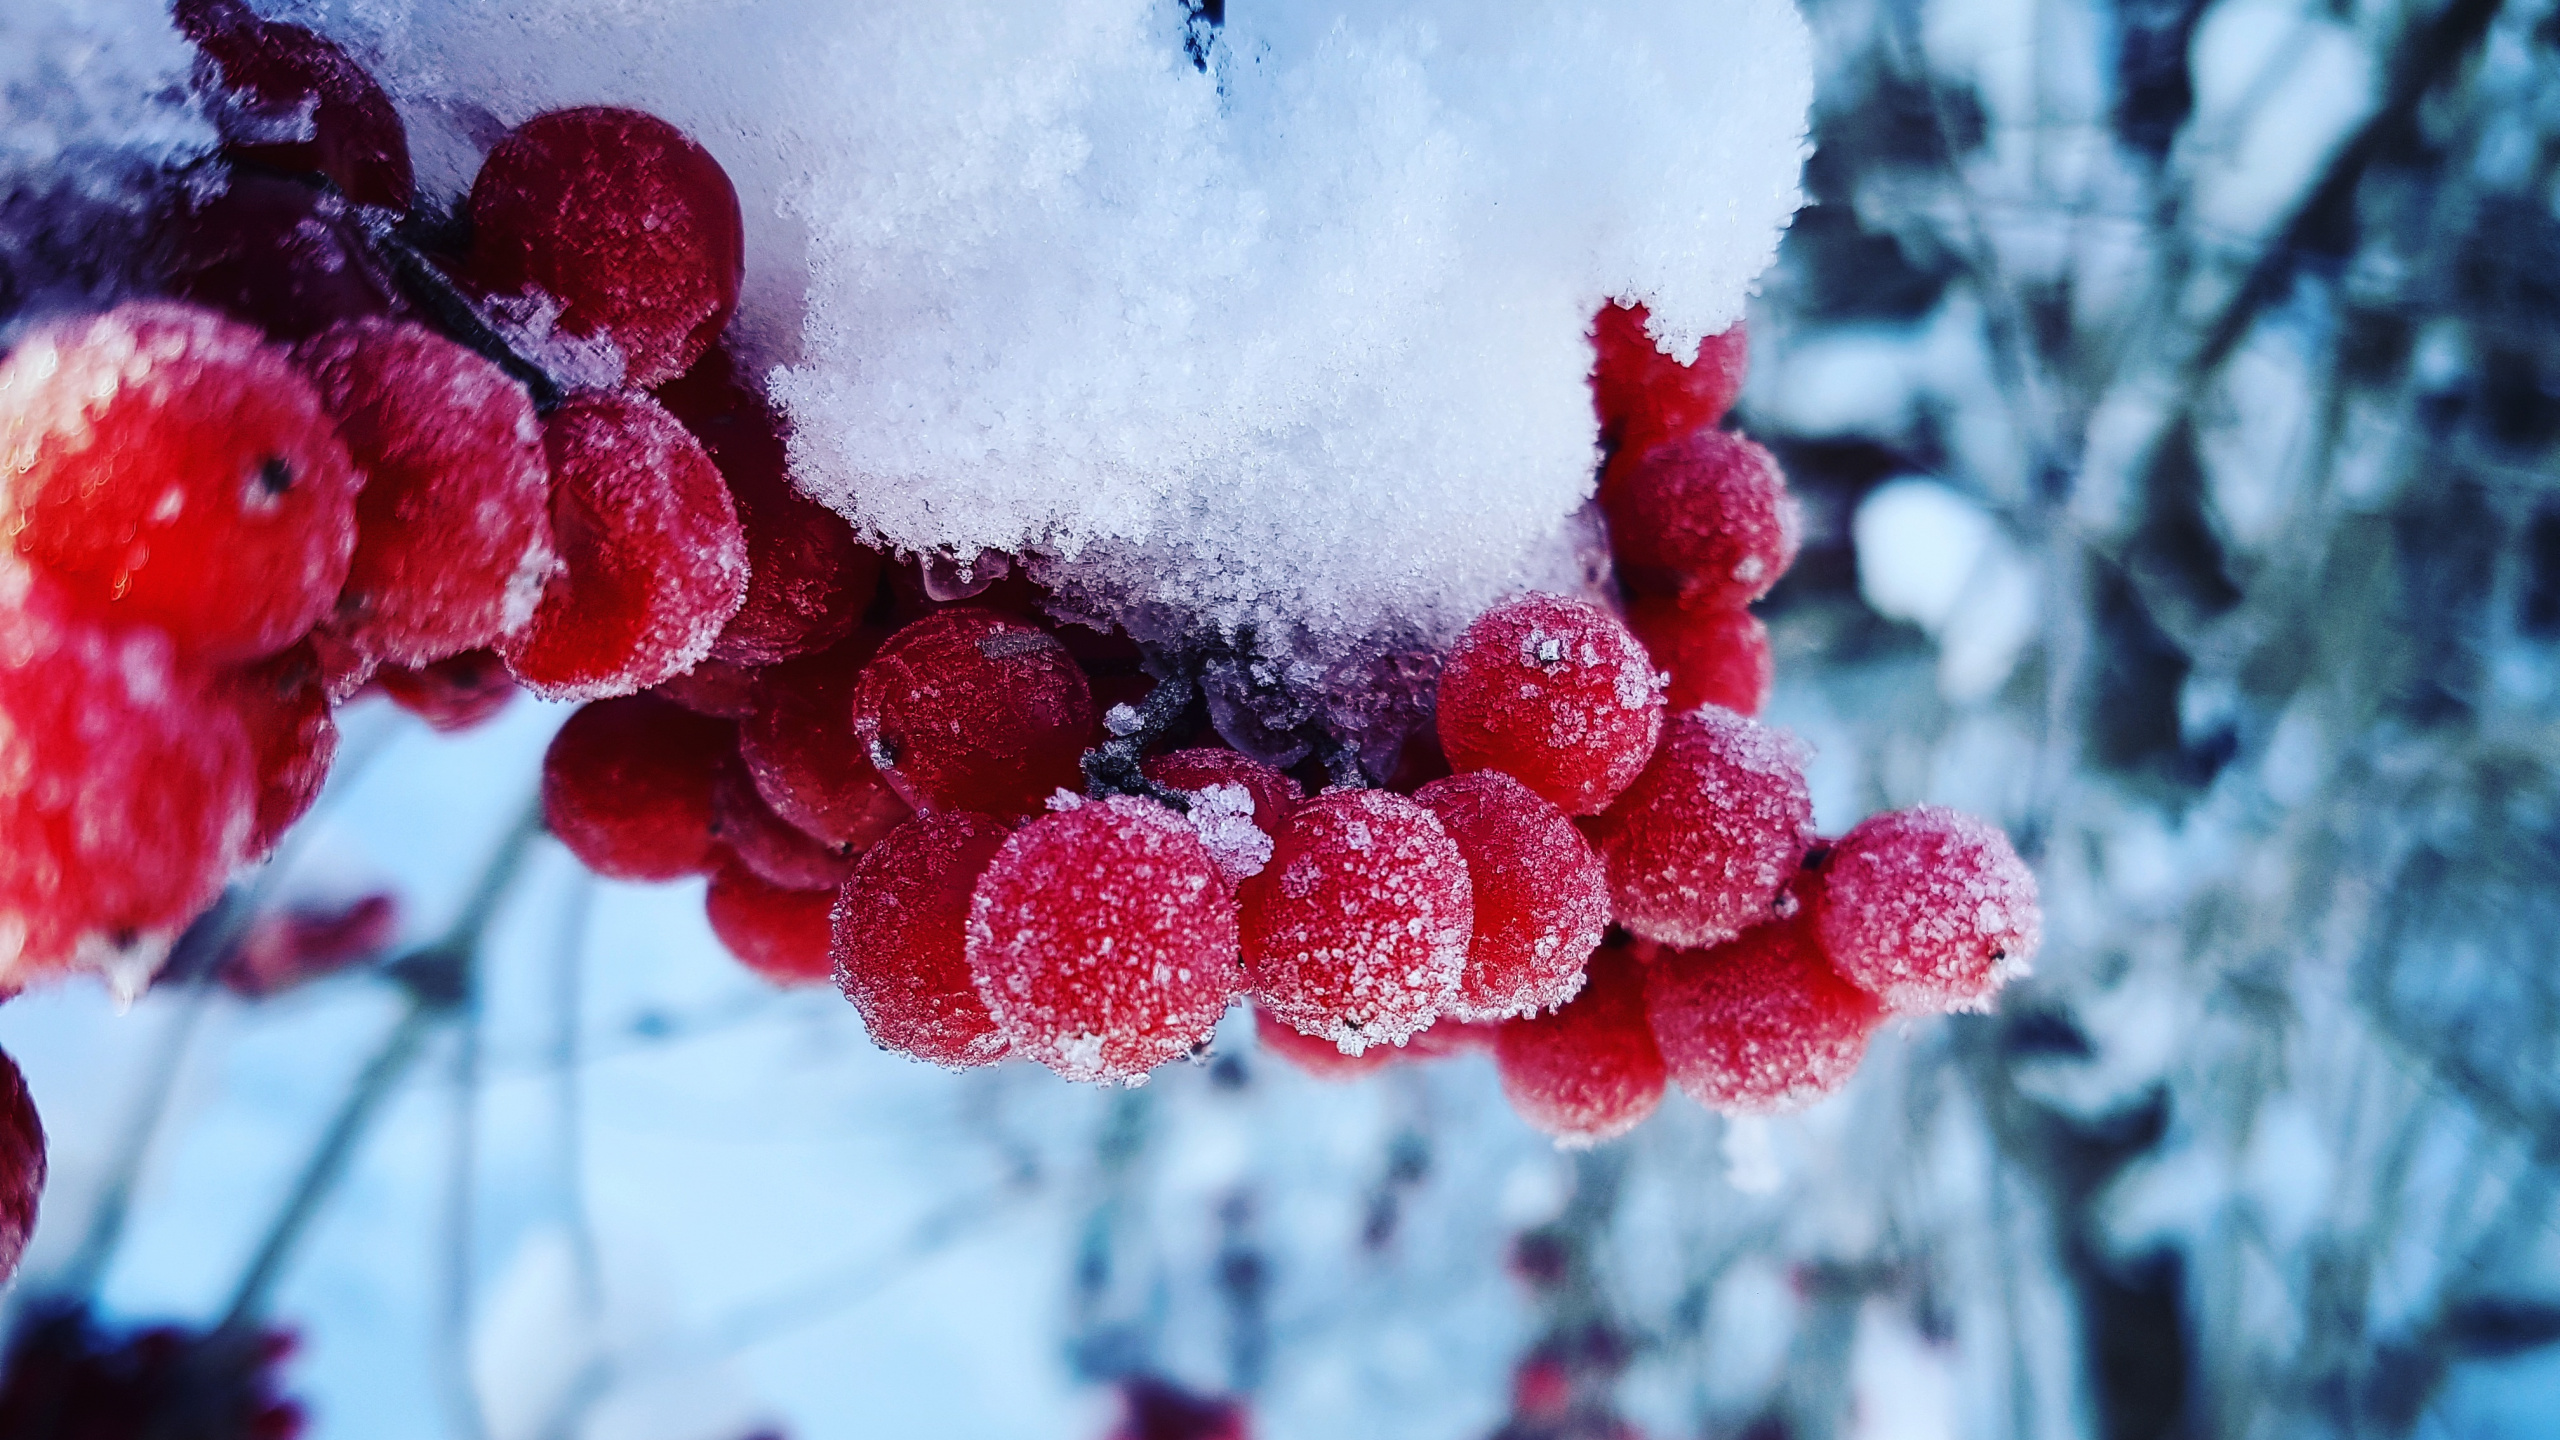 Fruits Ronds Rouges Recouverts de Neige. Wallpaper in 2560x1440 Resolution